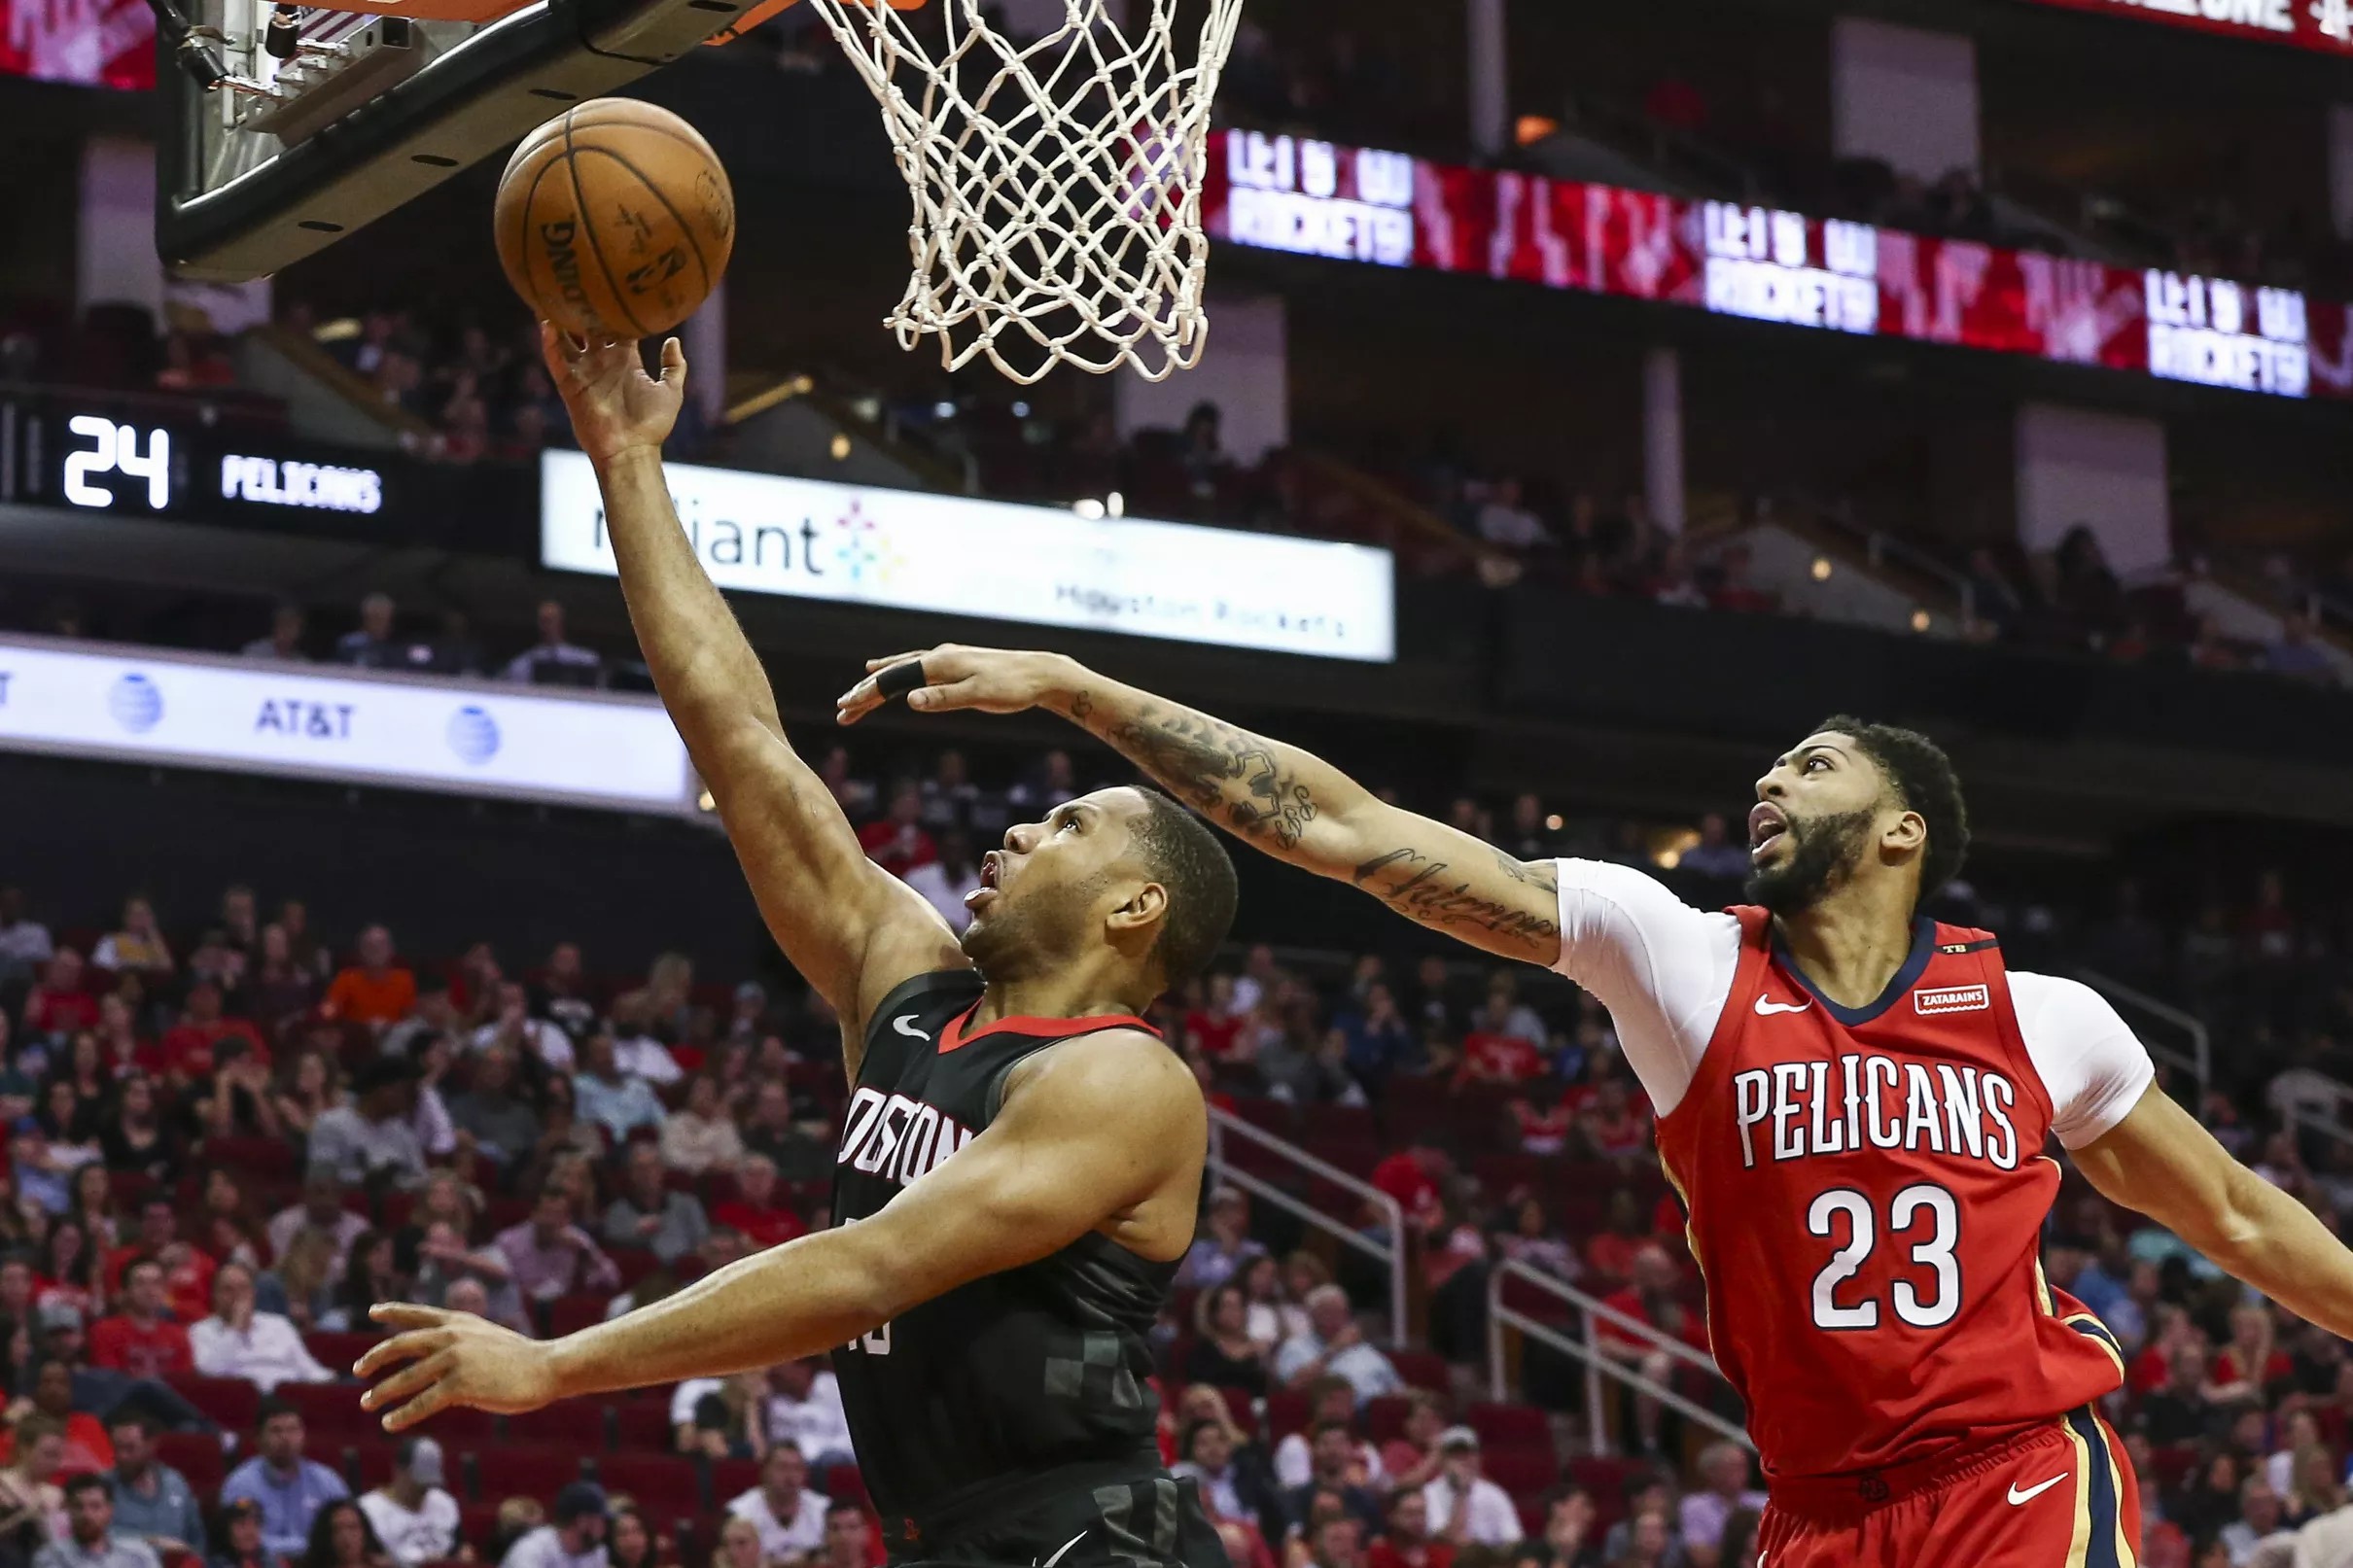 Houston Rockets vs. New Orleans Pelicans game preview